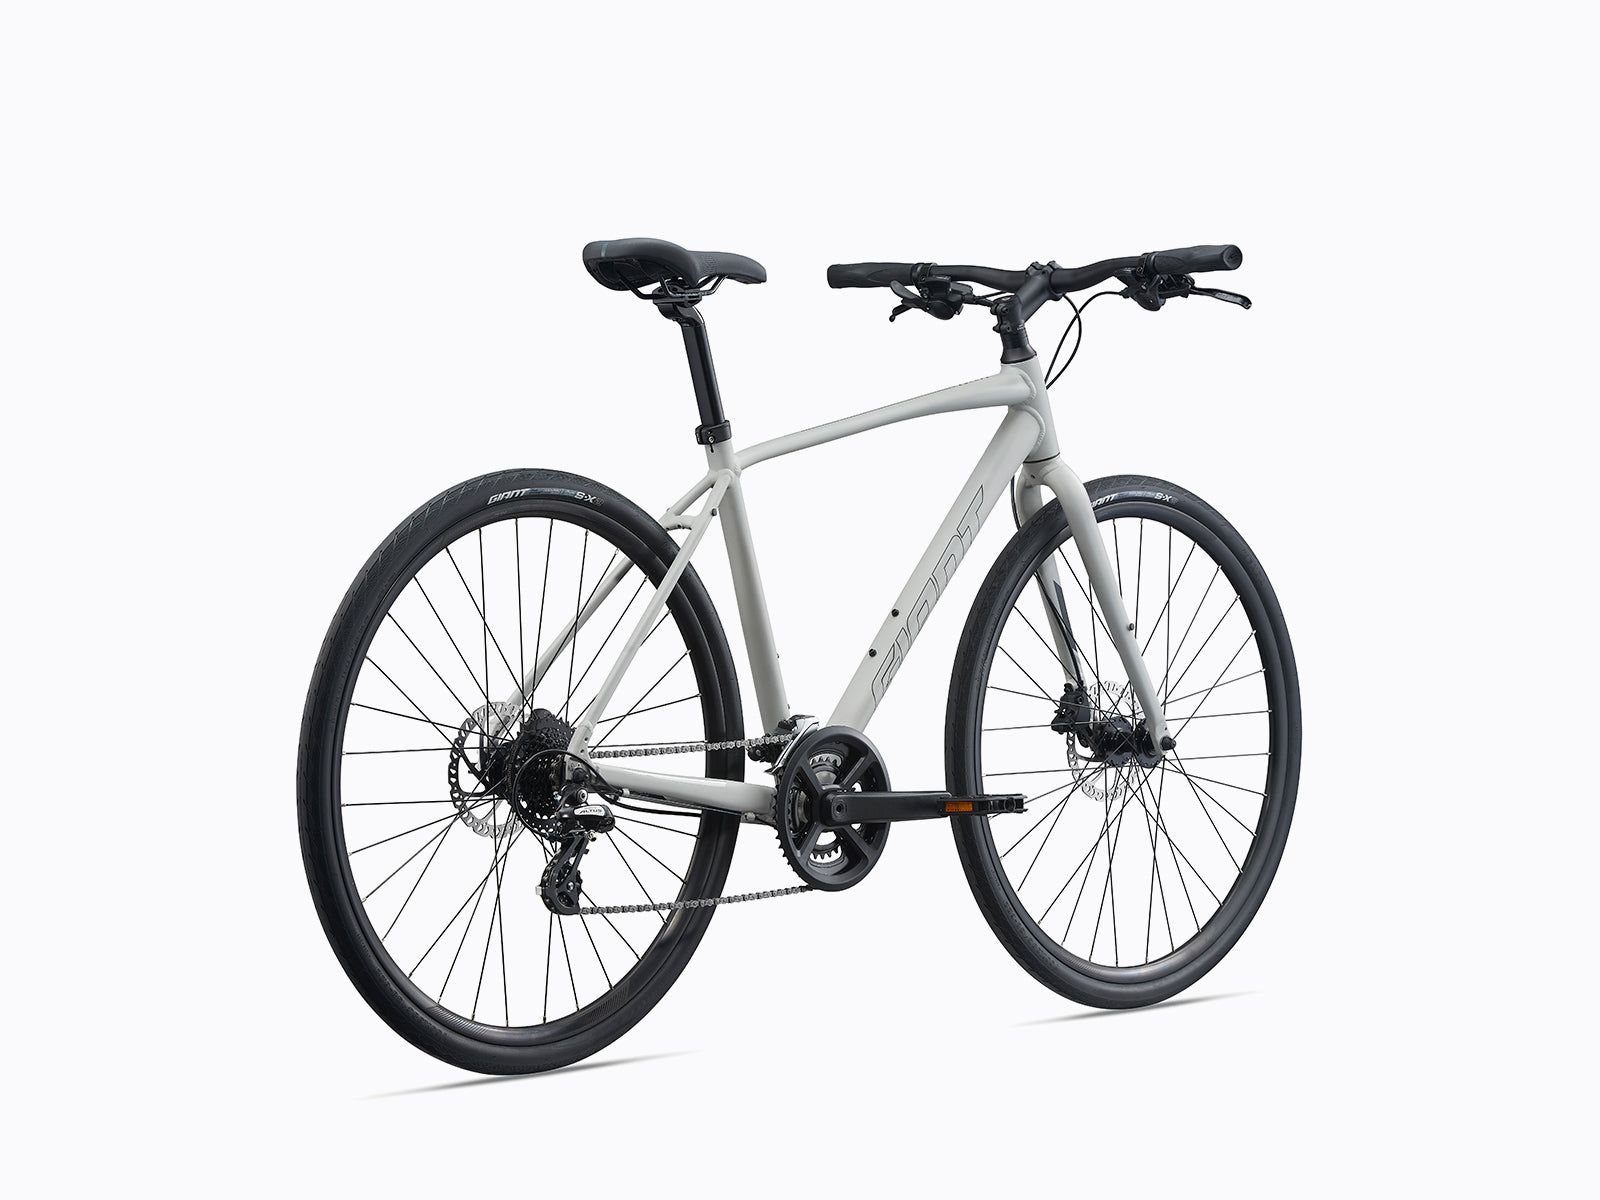 image features a Giant Cross City 2 Disc, a city bike designed for cyclist's commute to work or school